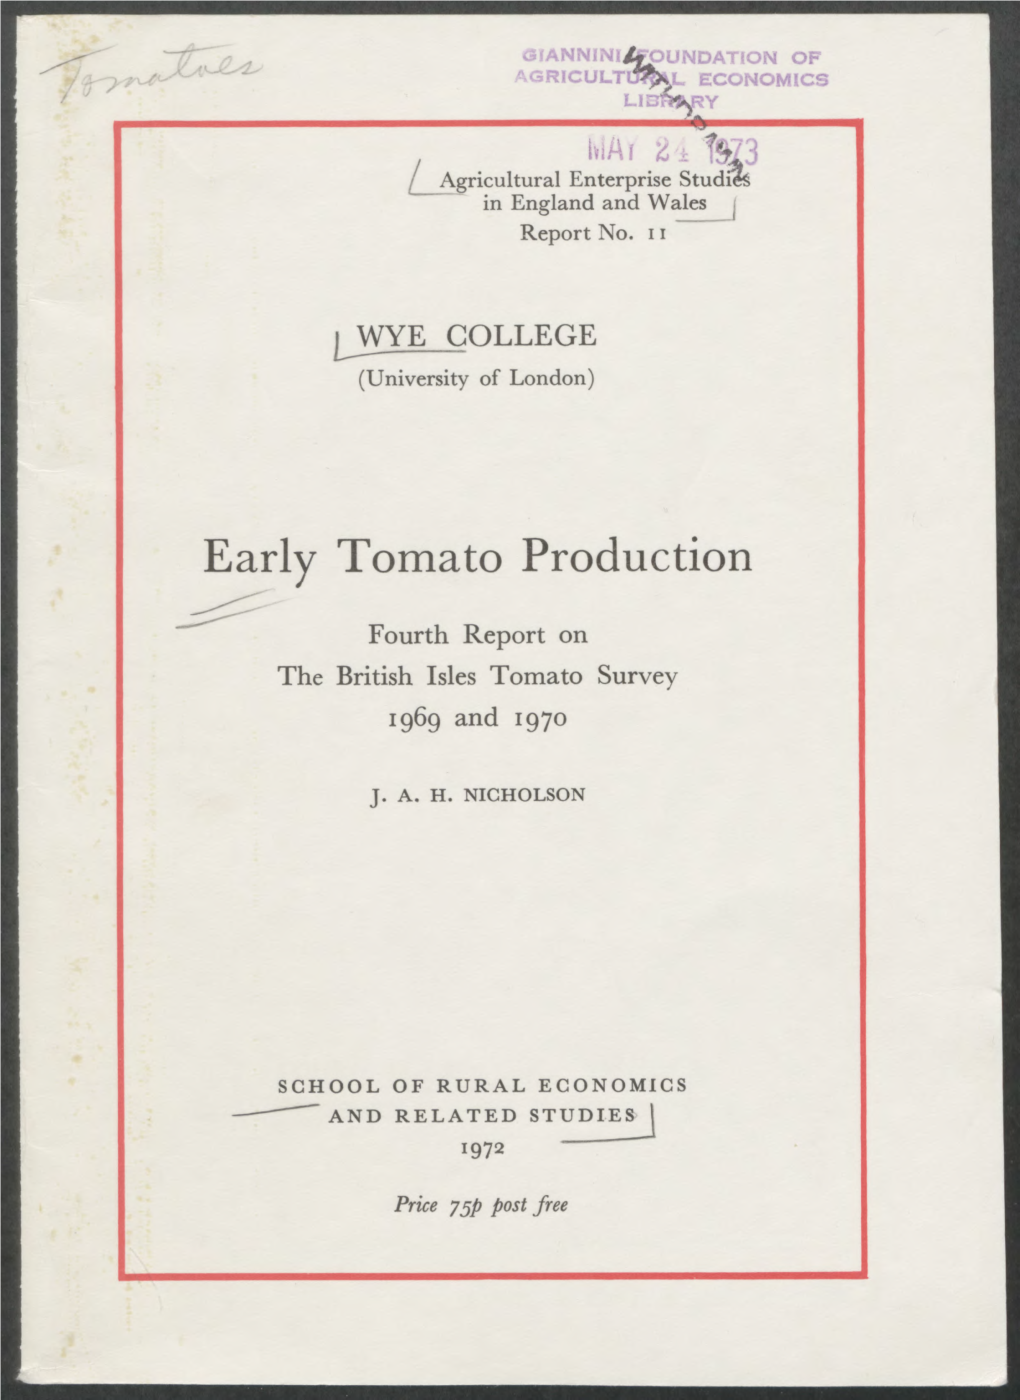 Early Tomato Production